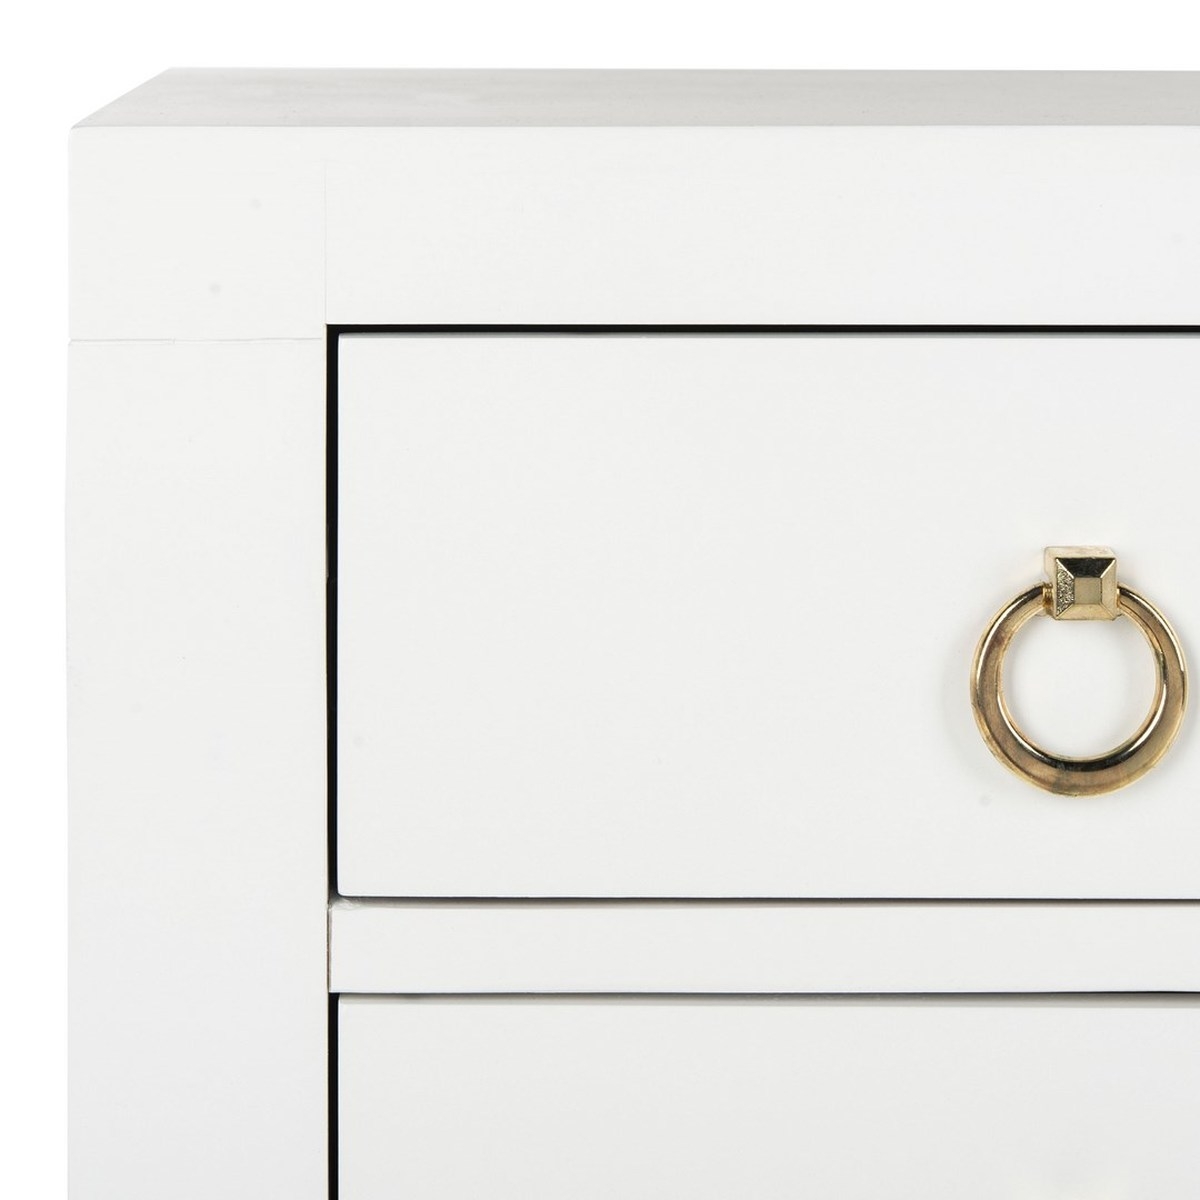 Dion 3 Drawer Chest - White/Gold - Arlo Home - Image 4